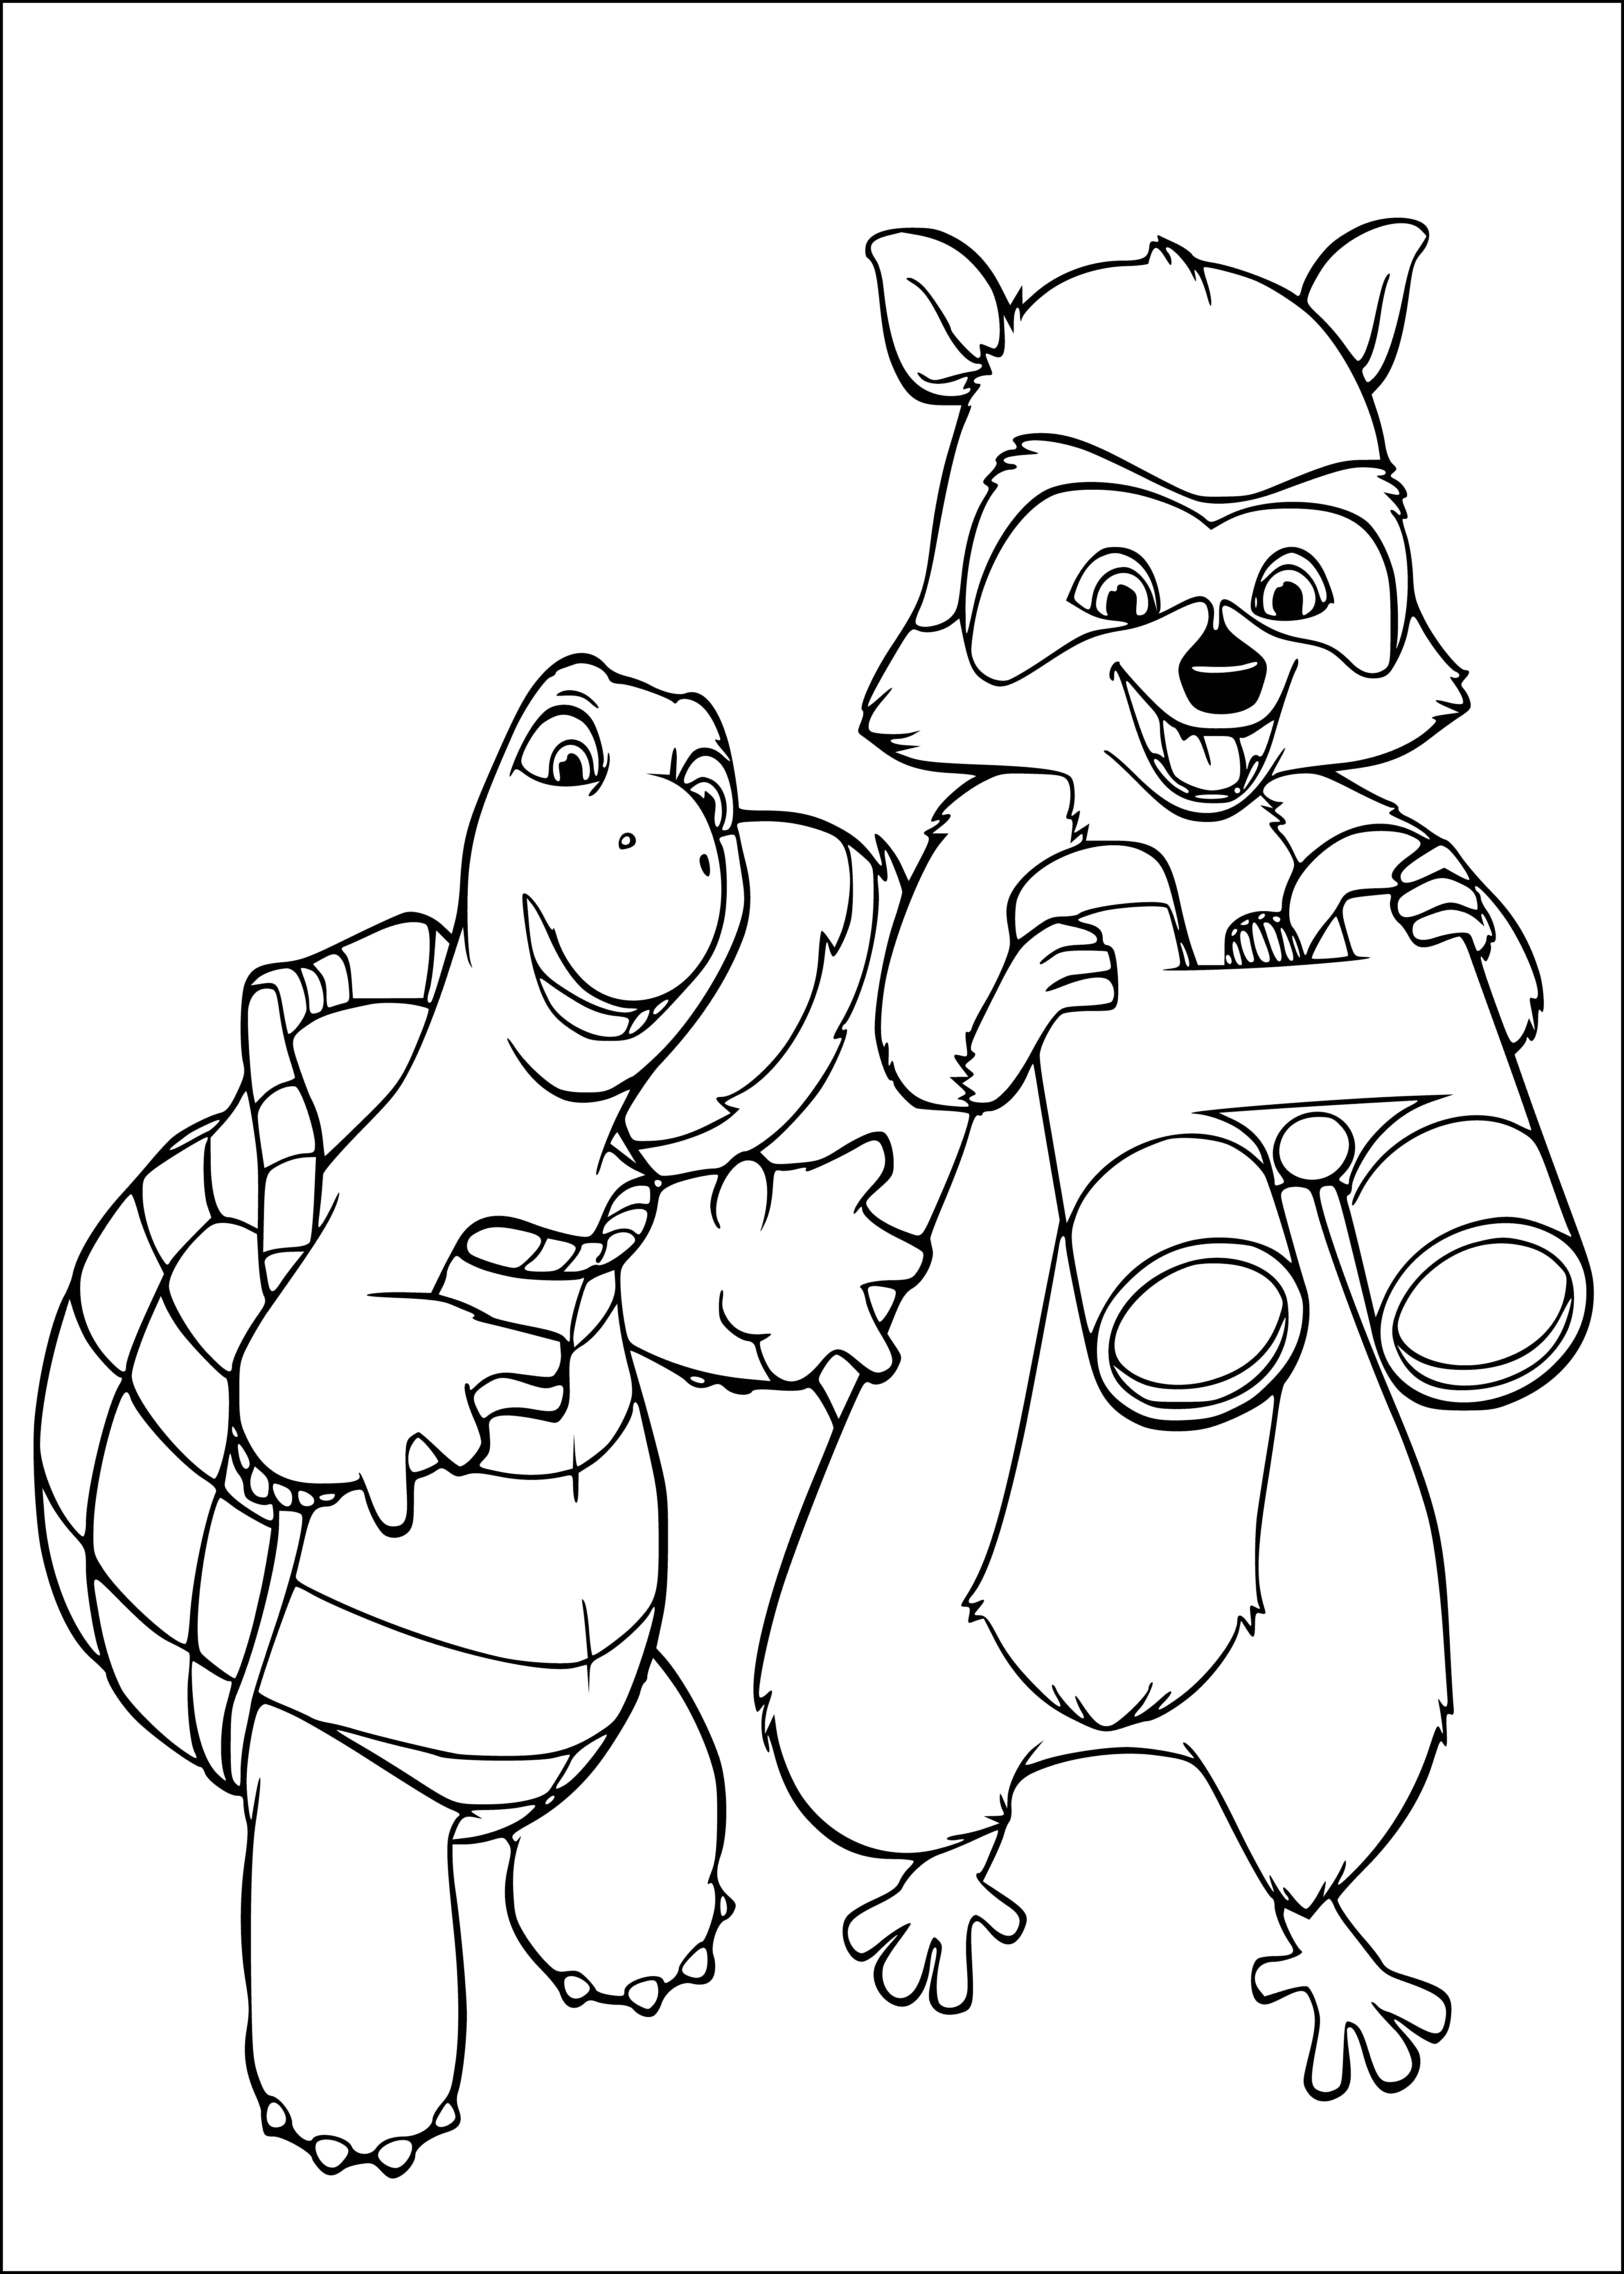 Turtle and RJ coloring page